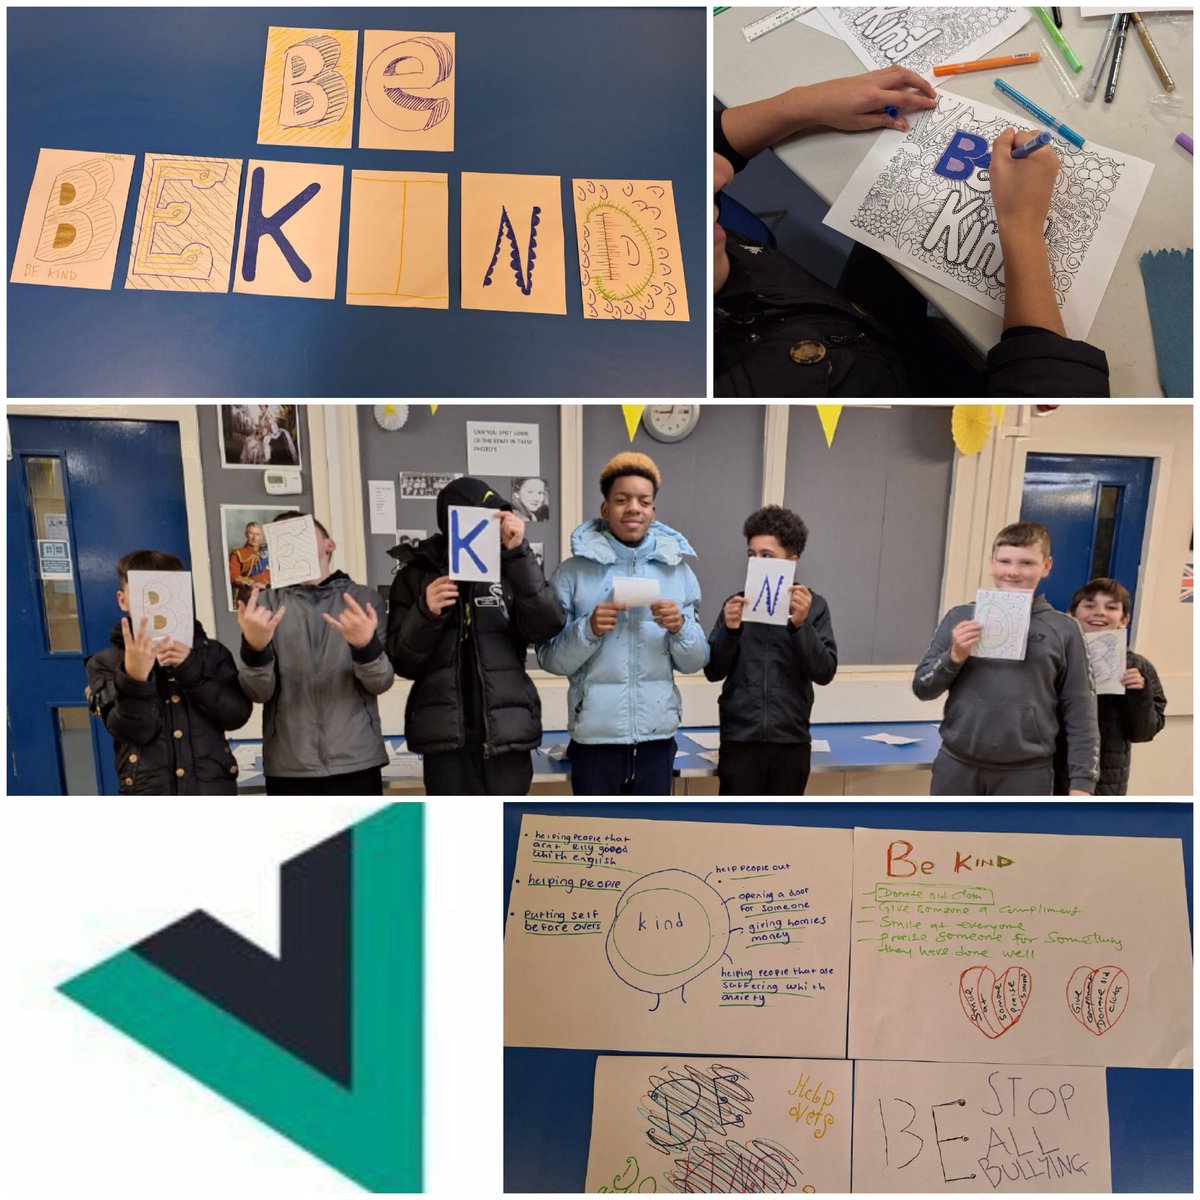 #WorldKindnessDay & #AntiBullyingWeek have been a focus in sessions across #Leeds this week. 

#Educating & #Empowering #Youngpeople on the impact of #bullying & the importance of #kindness

The below are from our @wy_vrp projects taking place across #Leeds 

#LeedsYouthService